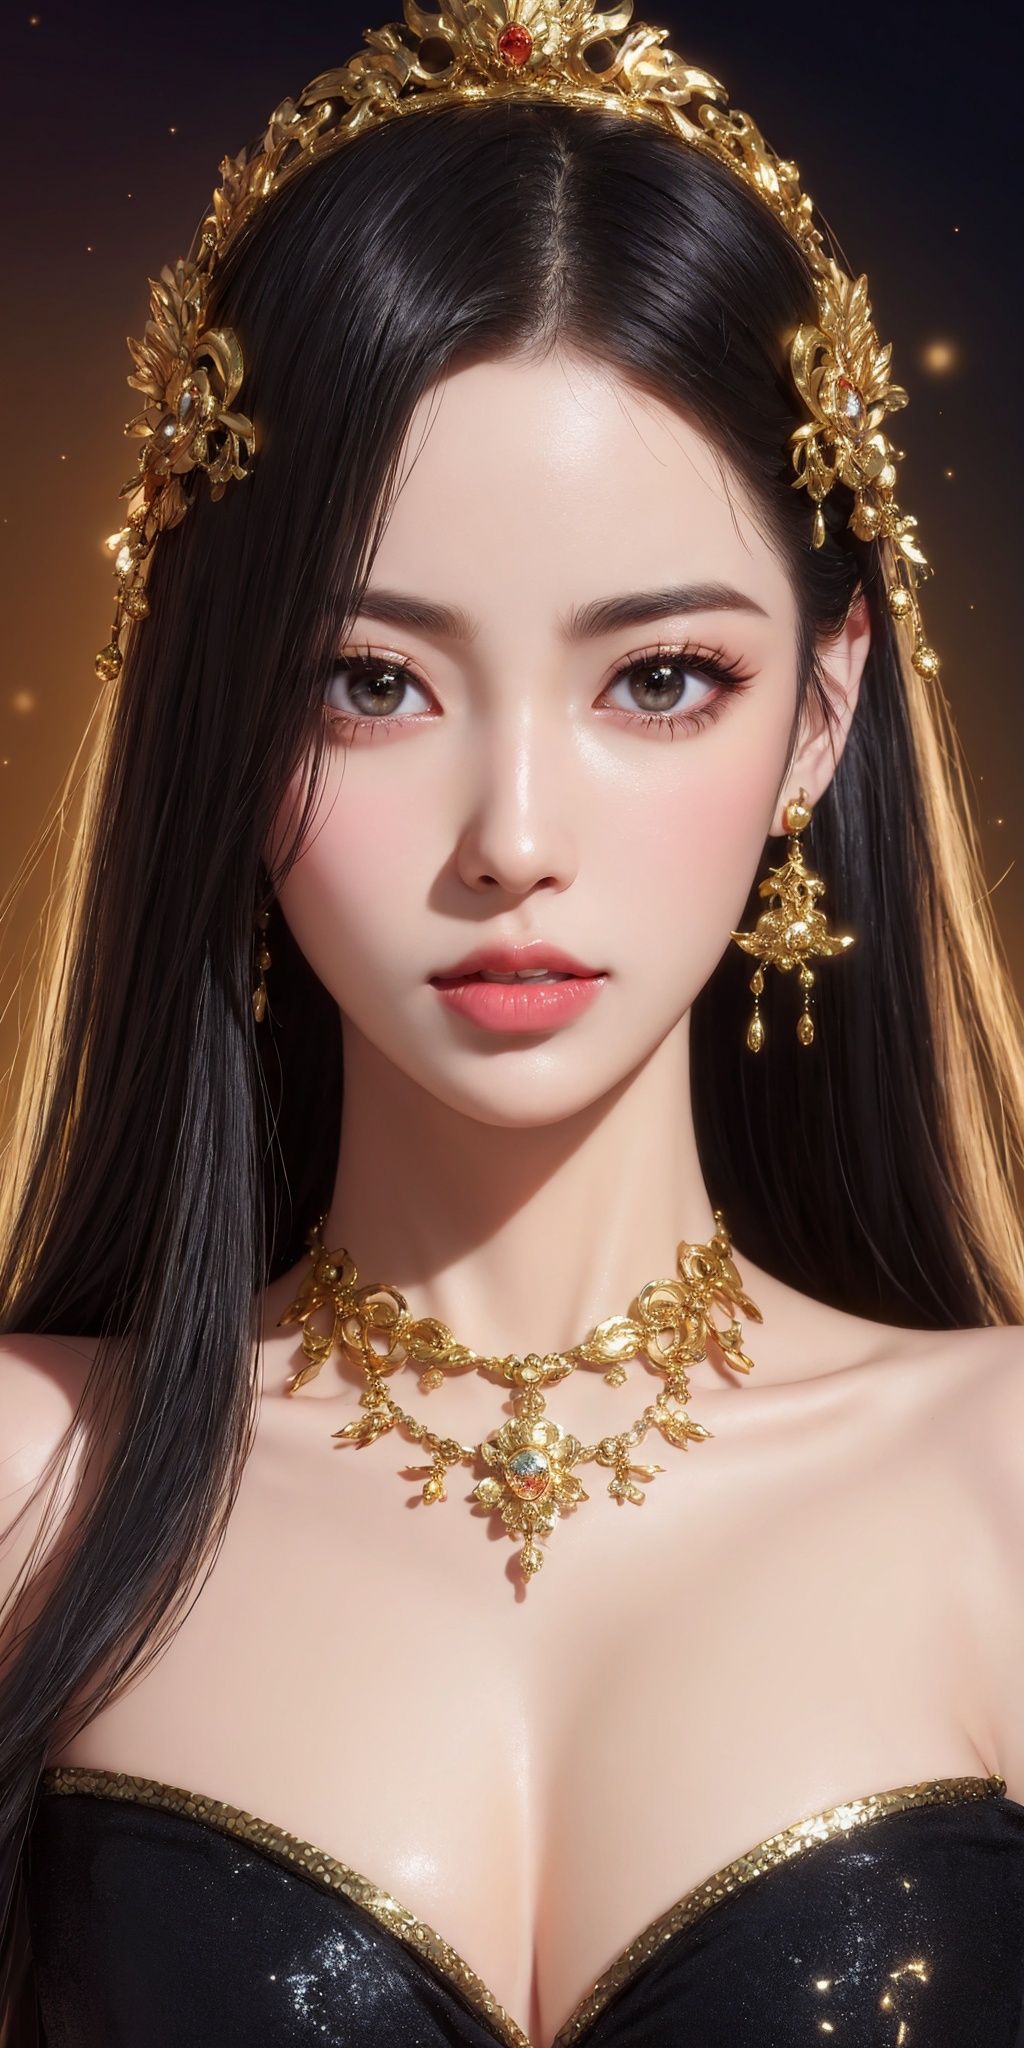 ((Half body photo)), facial close-up of a girl, long hair, gold headdress, gold earrings, gold streamers, off shoulder, (black dress, black dress), dark lines, gold decorations, sun, moon, holy, orange light, starry sky, night sky, cosmic background, goddess, beauty, clear eyes, correct hand painting, correct body painting